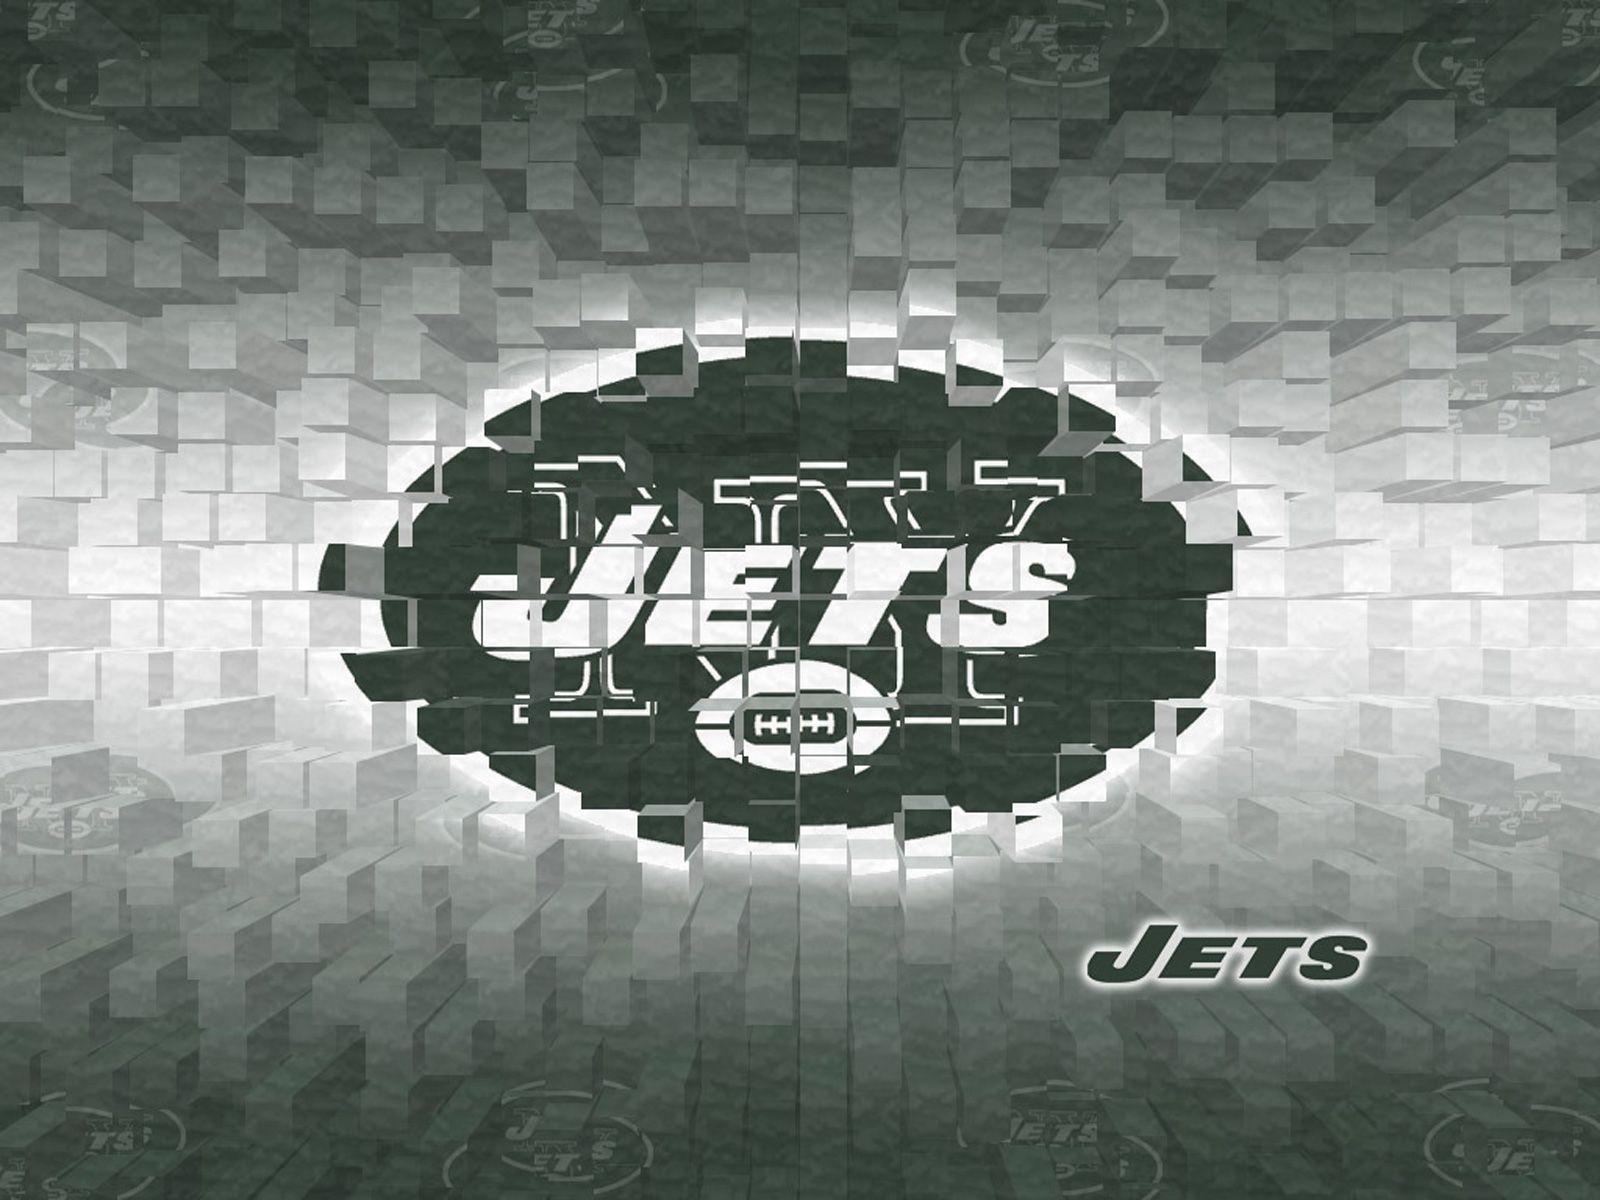 NY Jets 3D Wallpaper. Football Team Picture